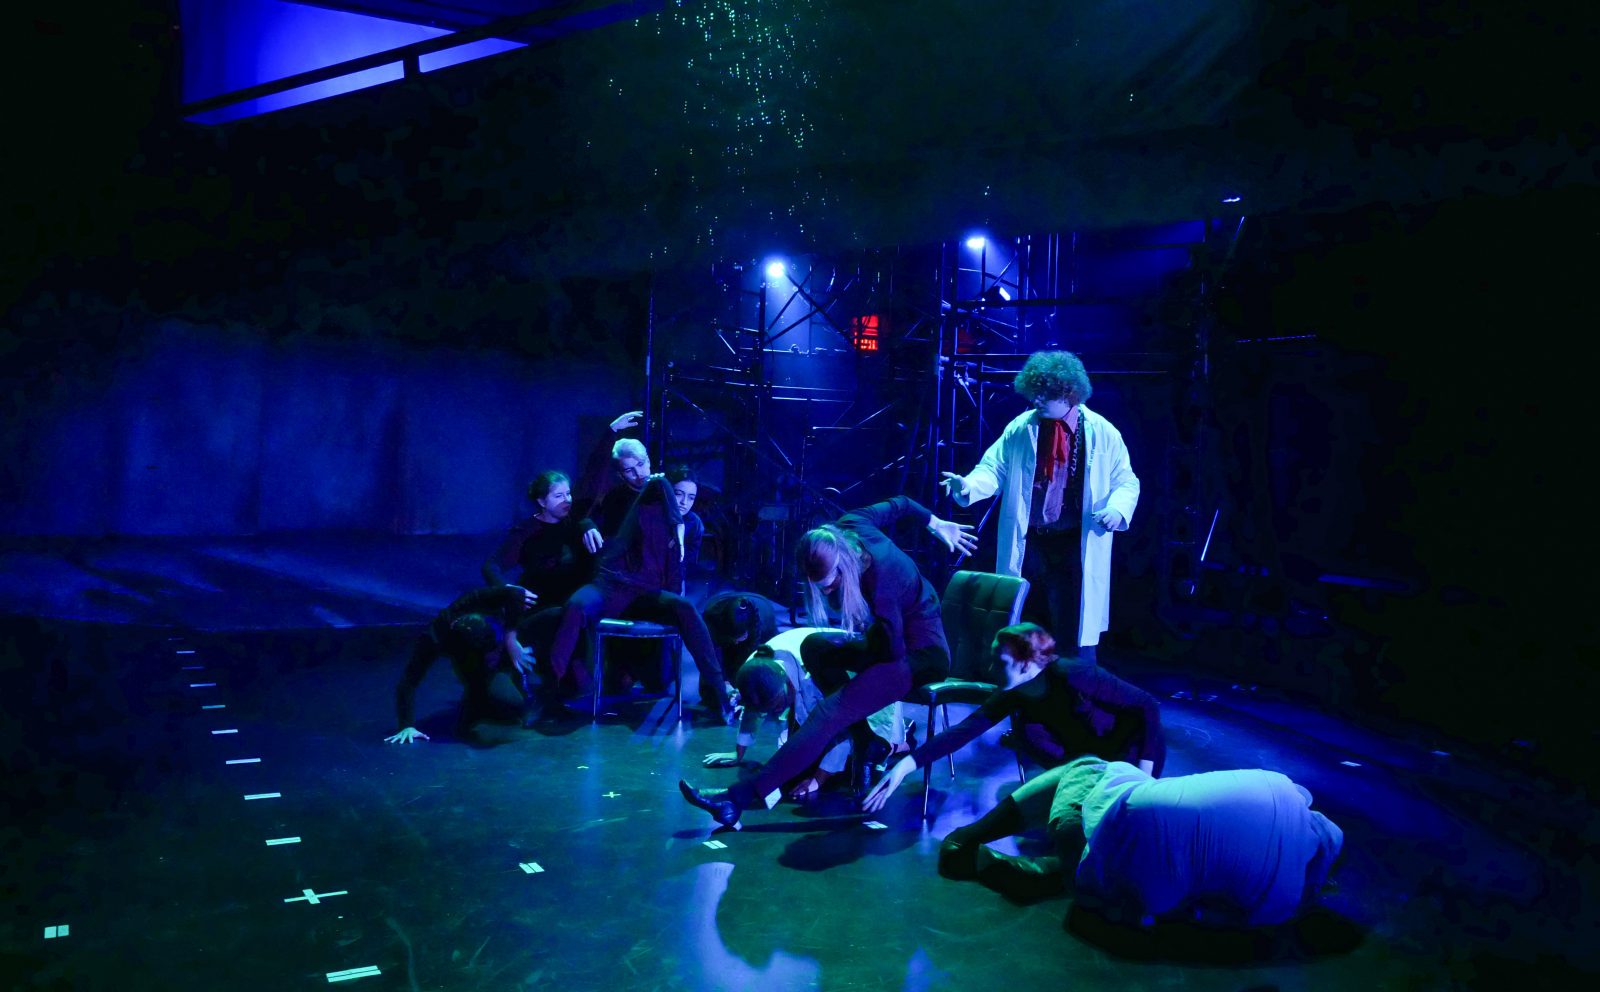 A dark stage with blue spotlights focused on 10 students at the centre of the stage. Two students sit in front with industrial scaffolding behind them.